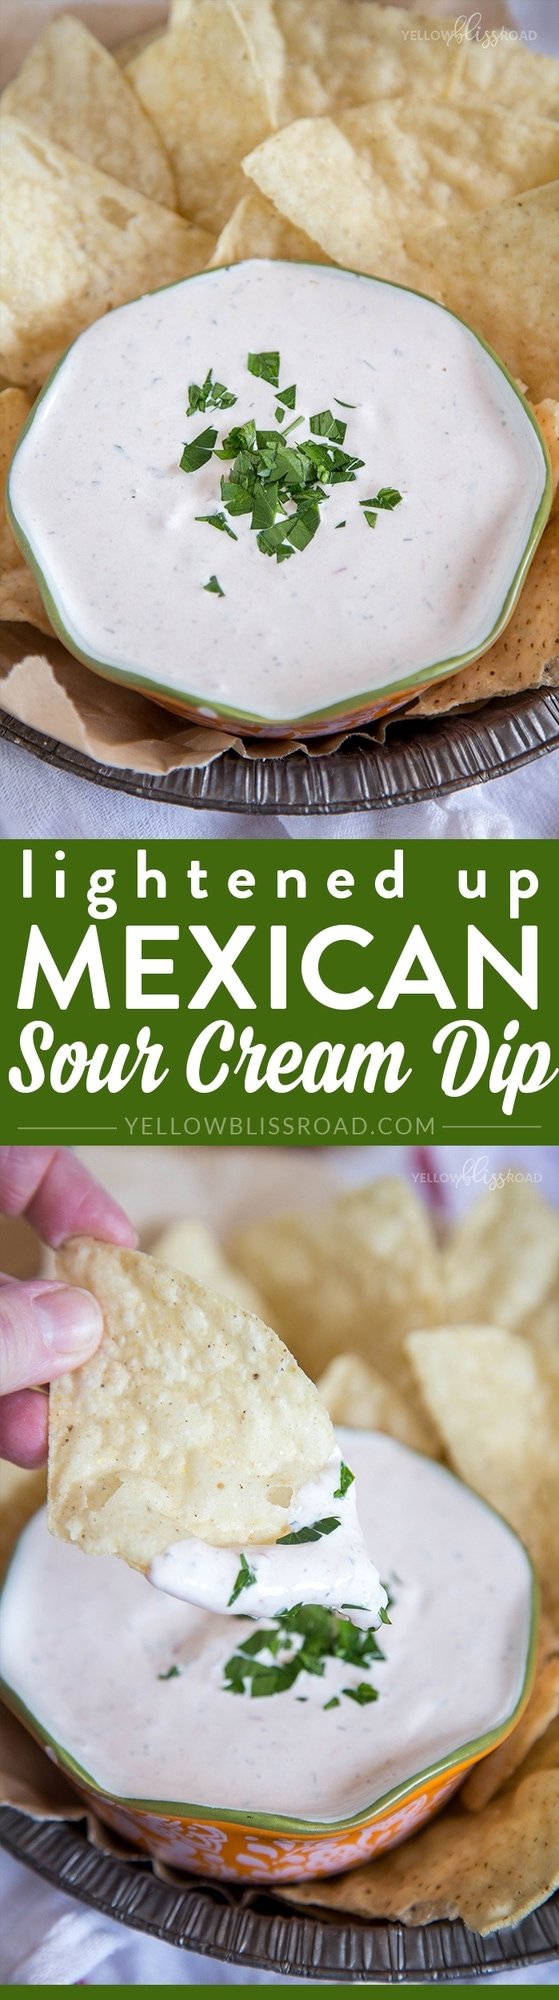 Lightened Up Mexican Sour Cream Dip